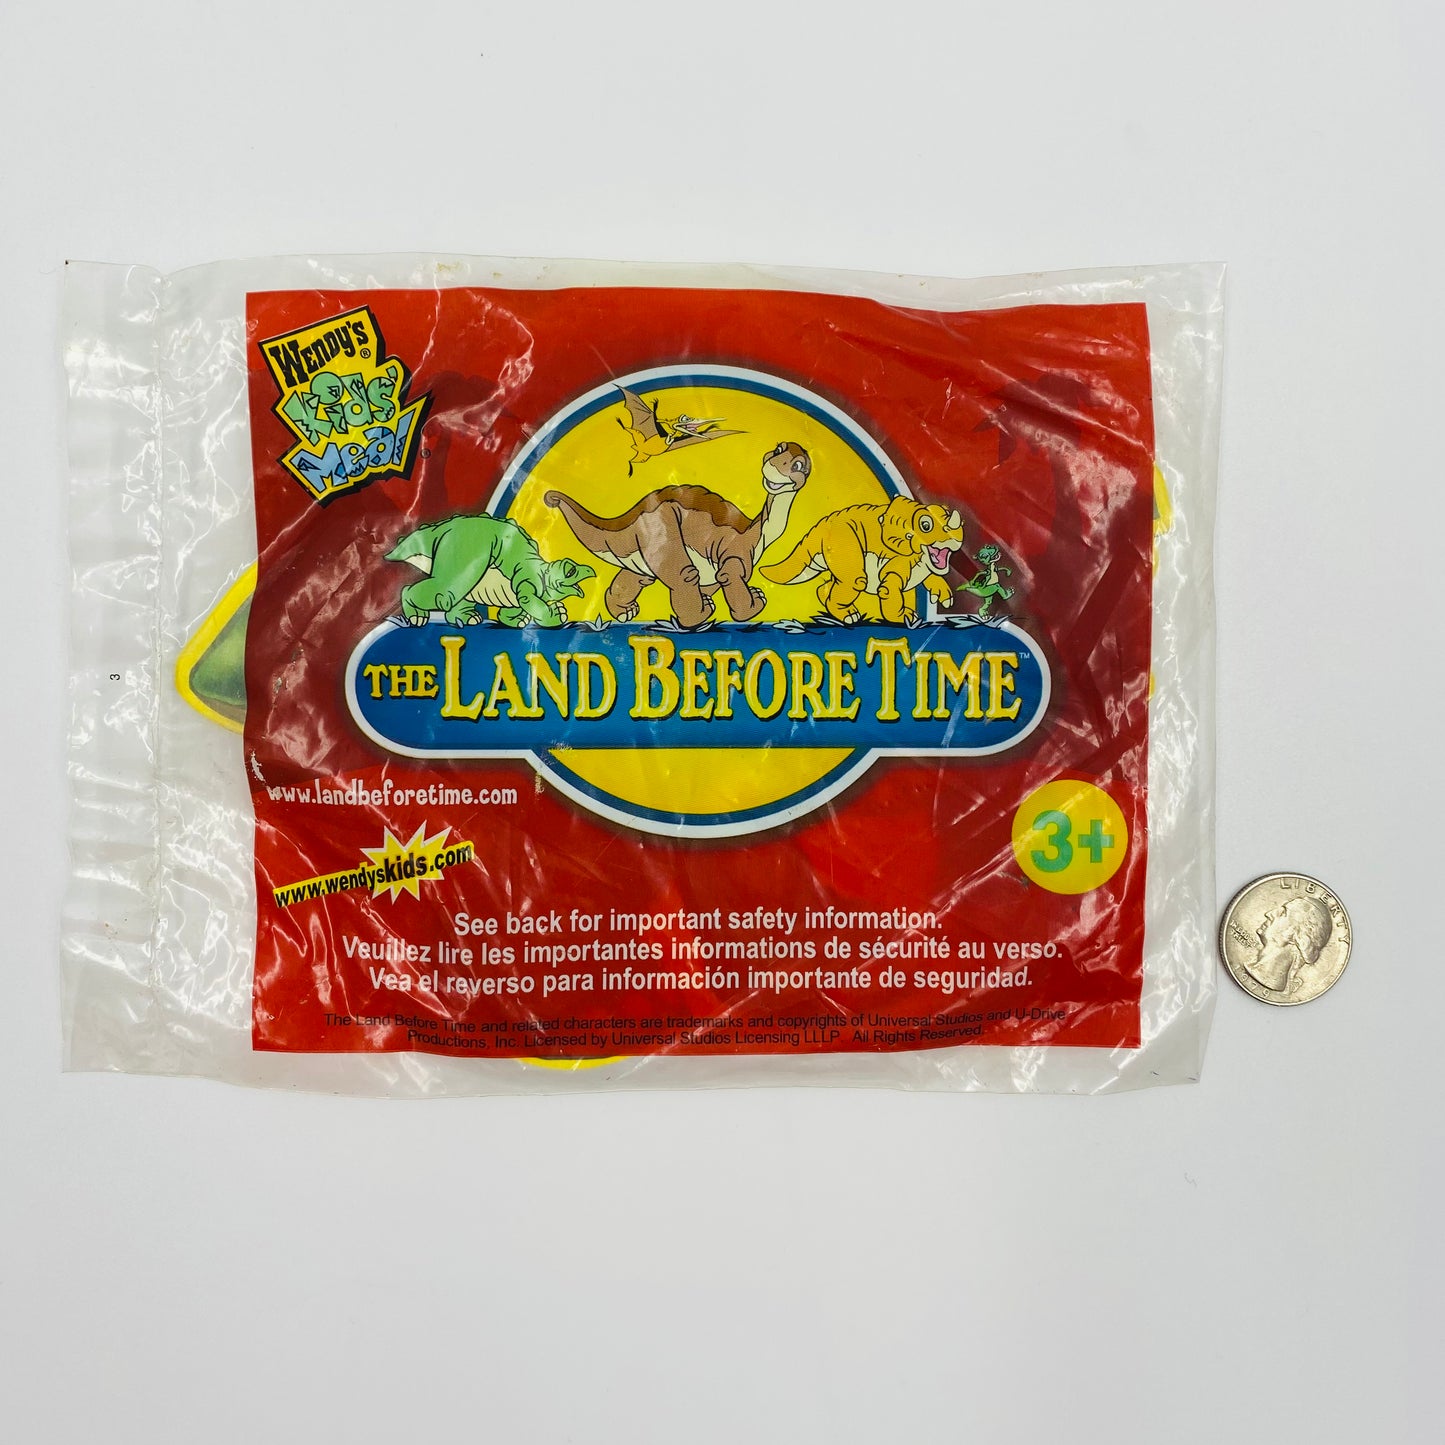 The Land Before Time Spike's Art Pad Kit Wendy's Kids' Meal toy (2003) bagged